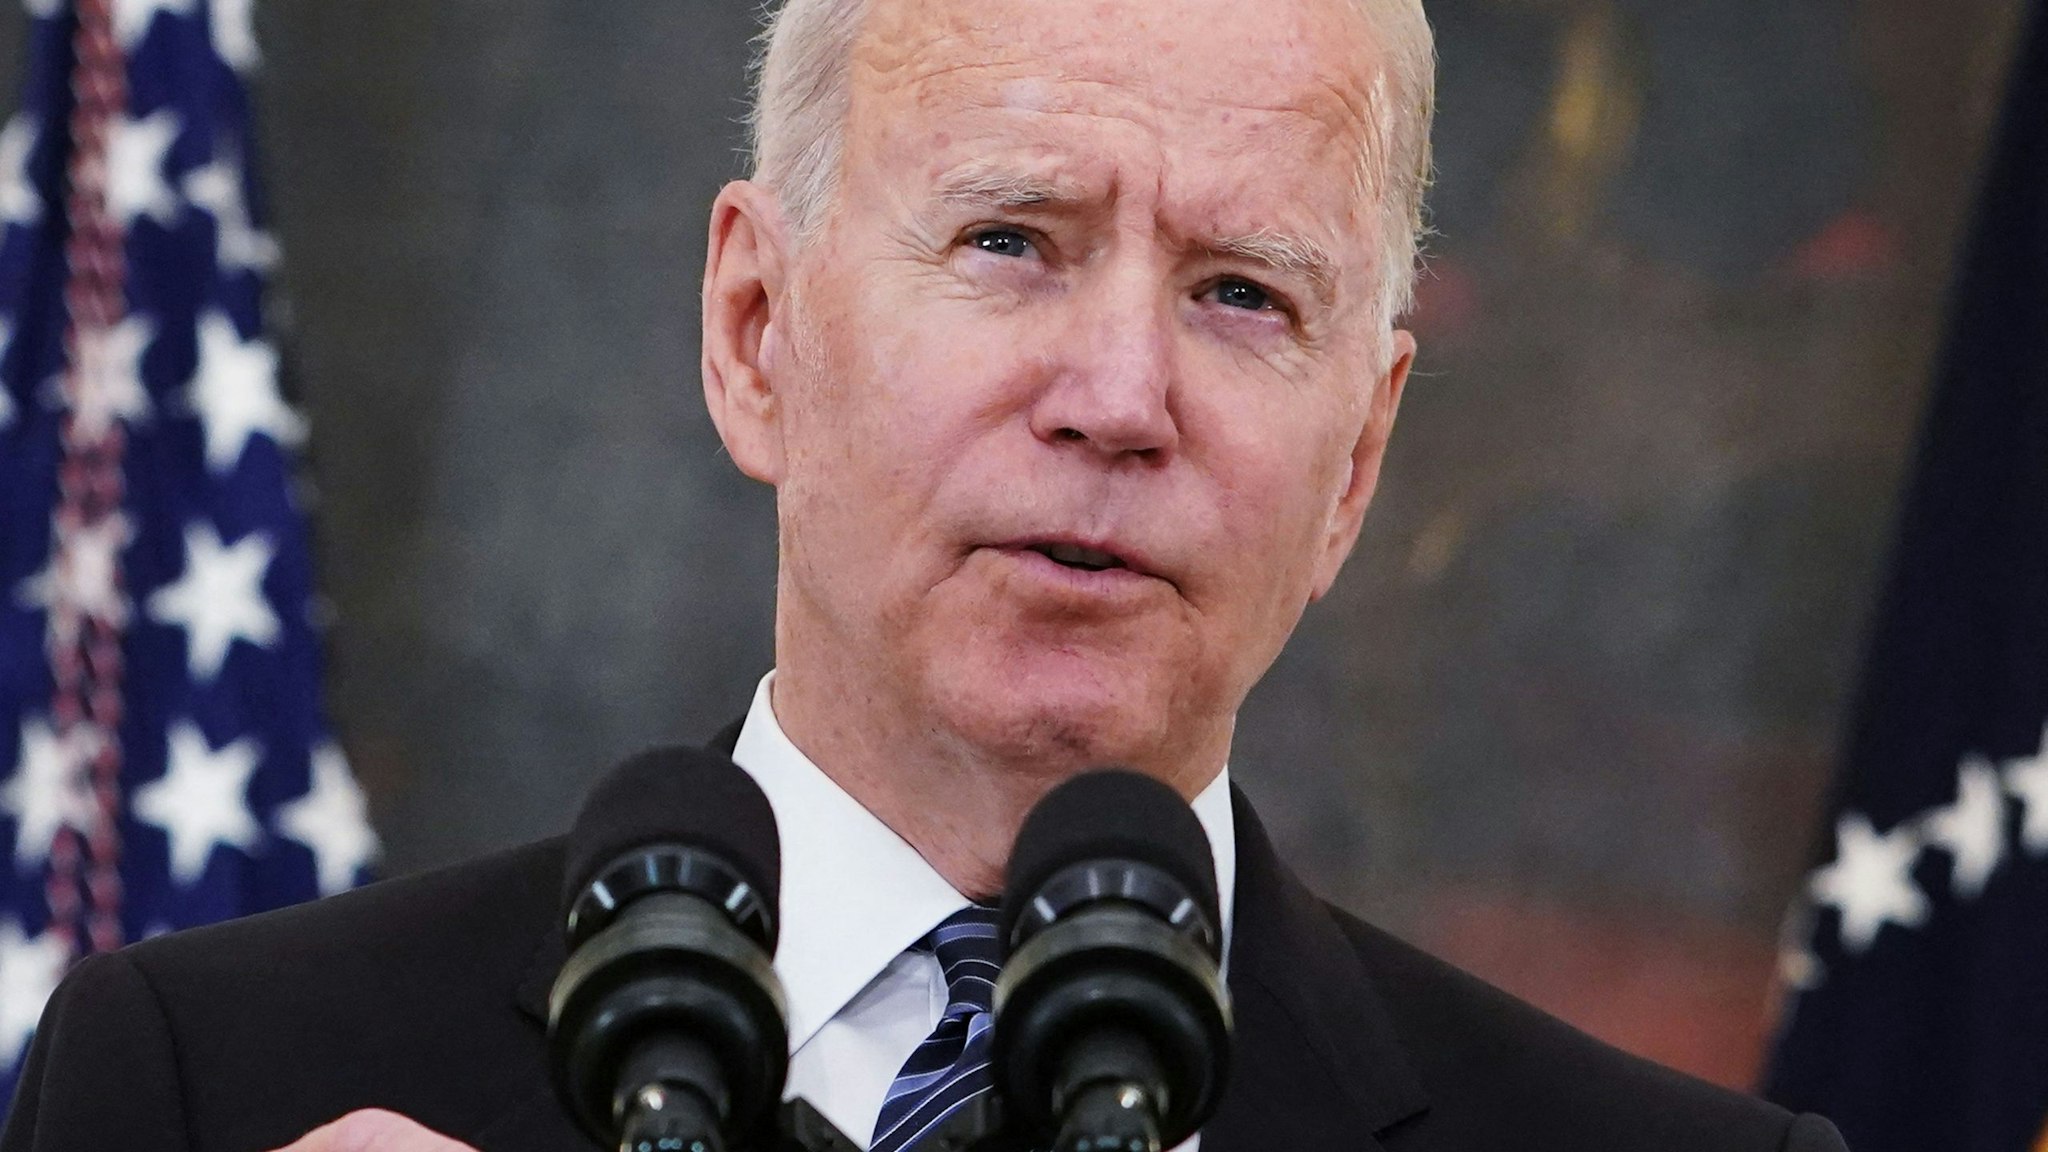 US President Joe Biden speaks about crime prevention, in the State Dining Room of the White House in Washington, DC on June 23, 2021. - President Biden unveiled new measures Wednesday to tackle gun violence against a backdrop of surging crime that his Republican rivals have seized on for weeks.